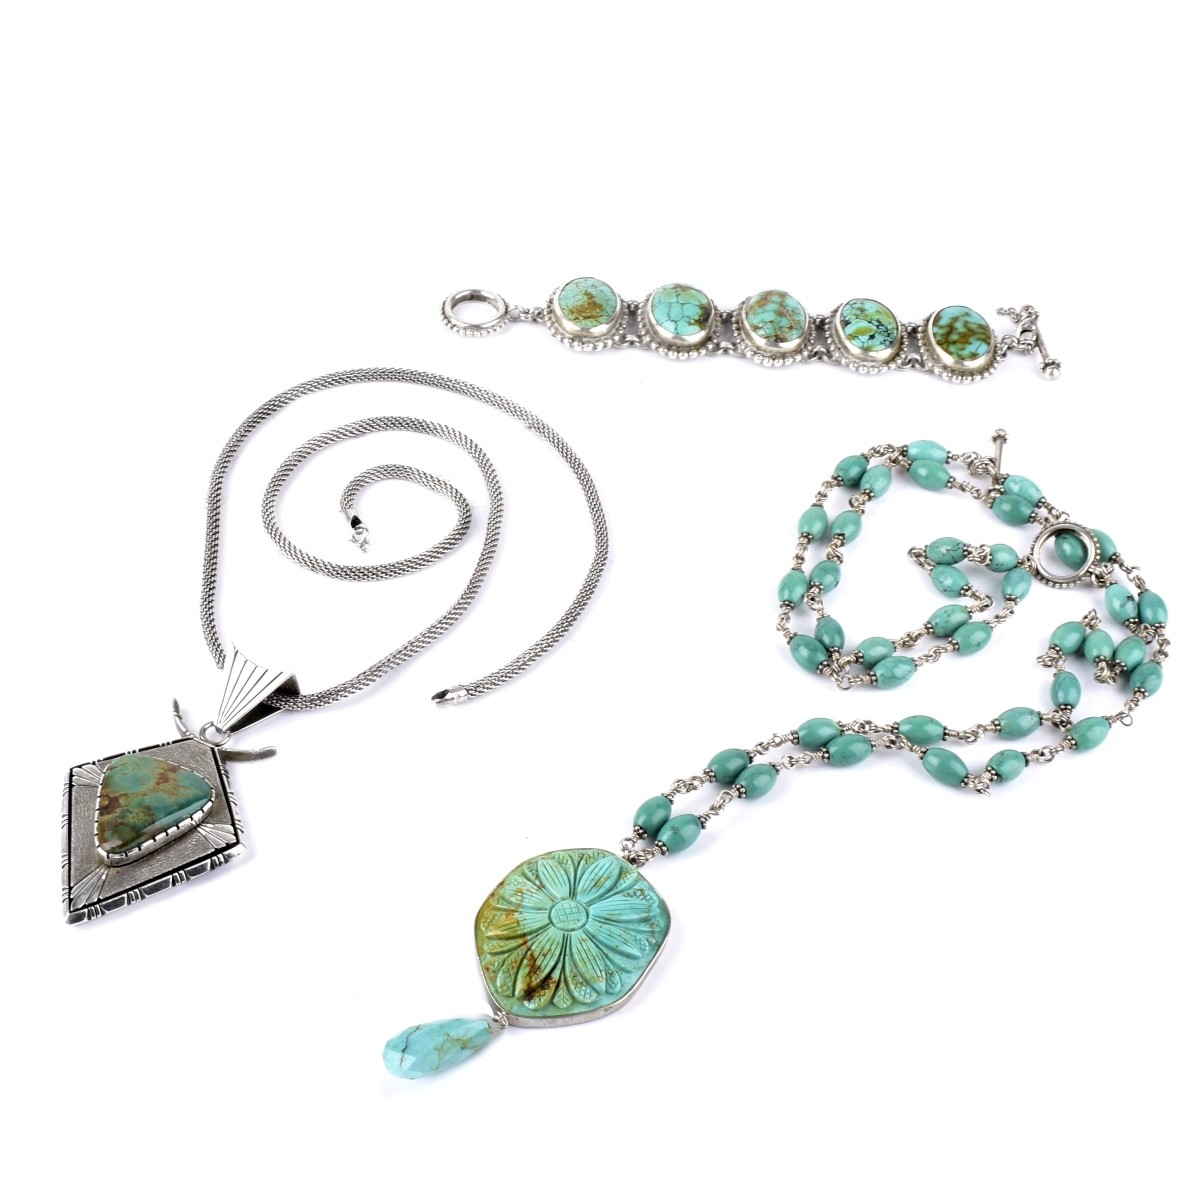 Turquoise and Sterling Jewelry Group